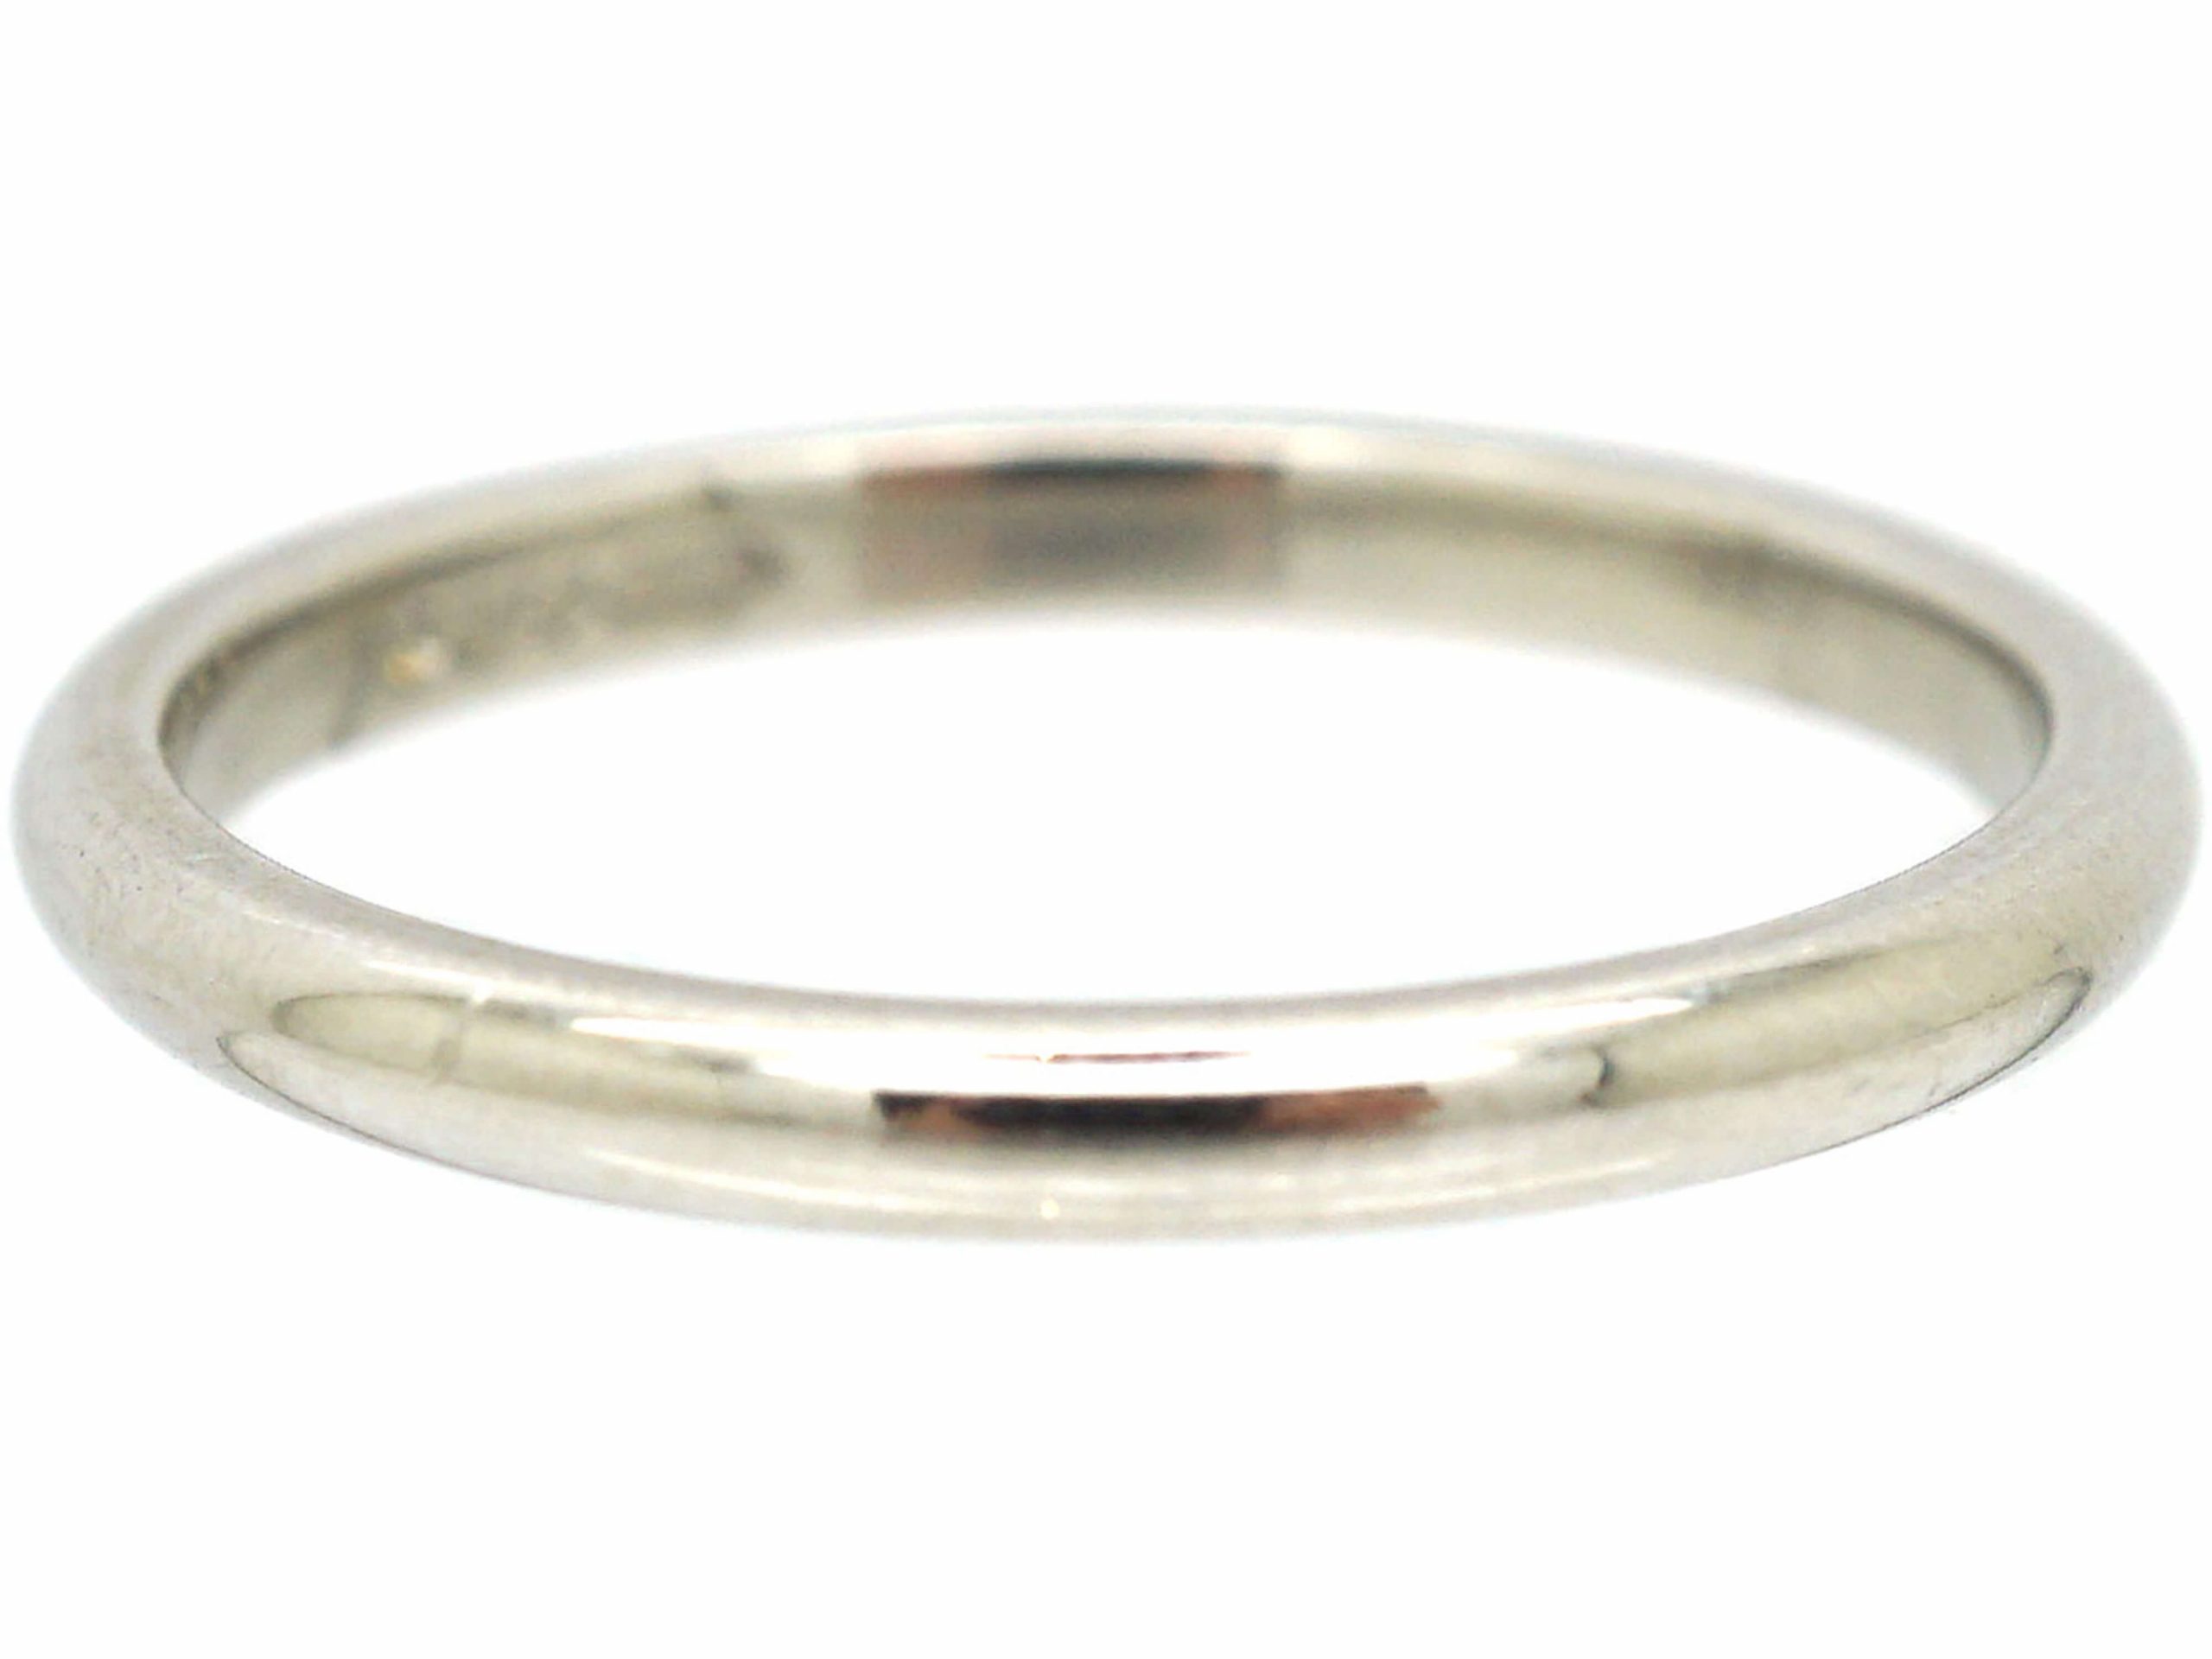 Platinum Wedding Ring by Charles Green & Sons (401S) | The Antique ...